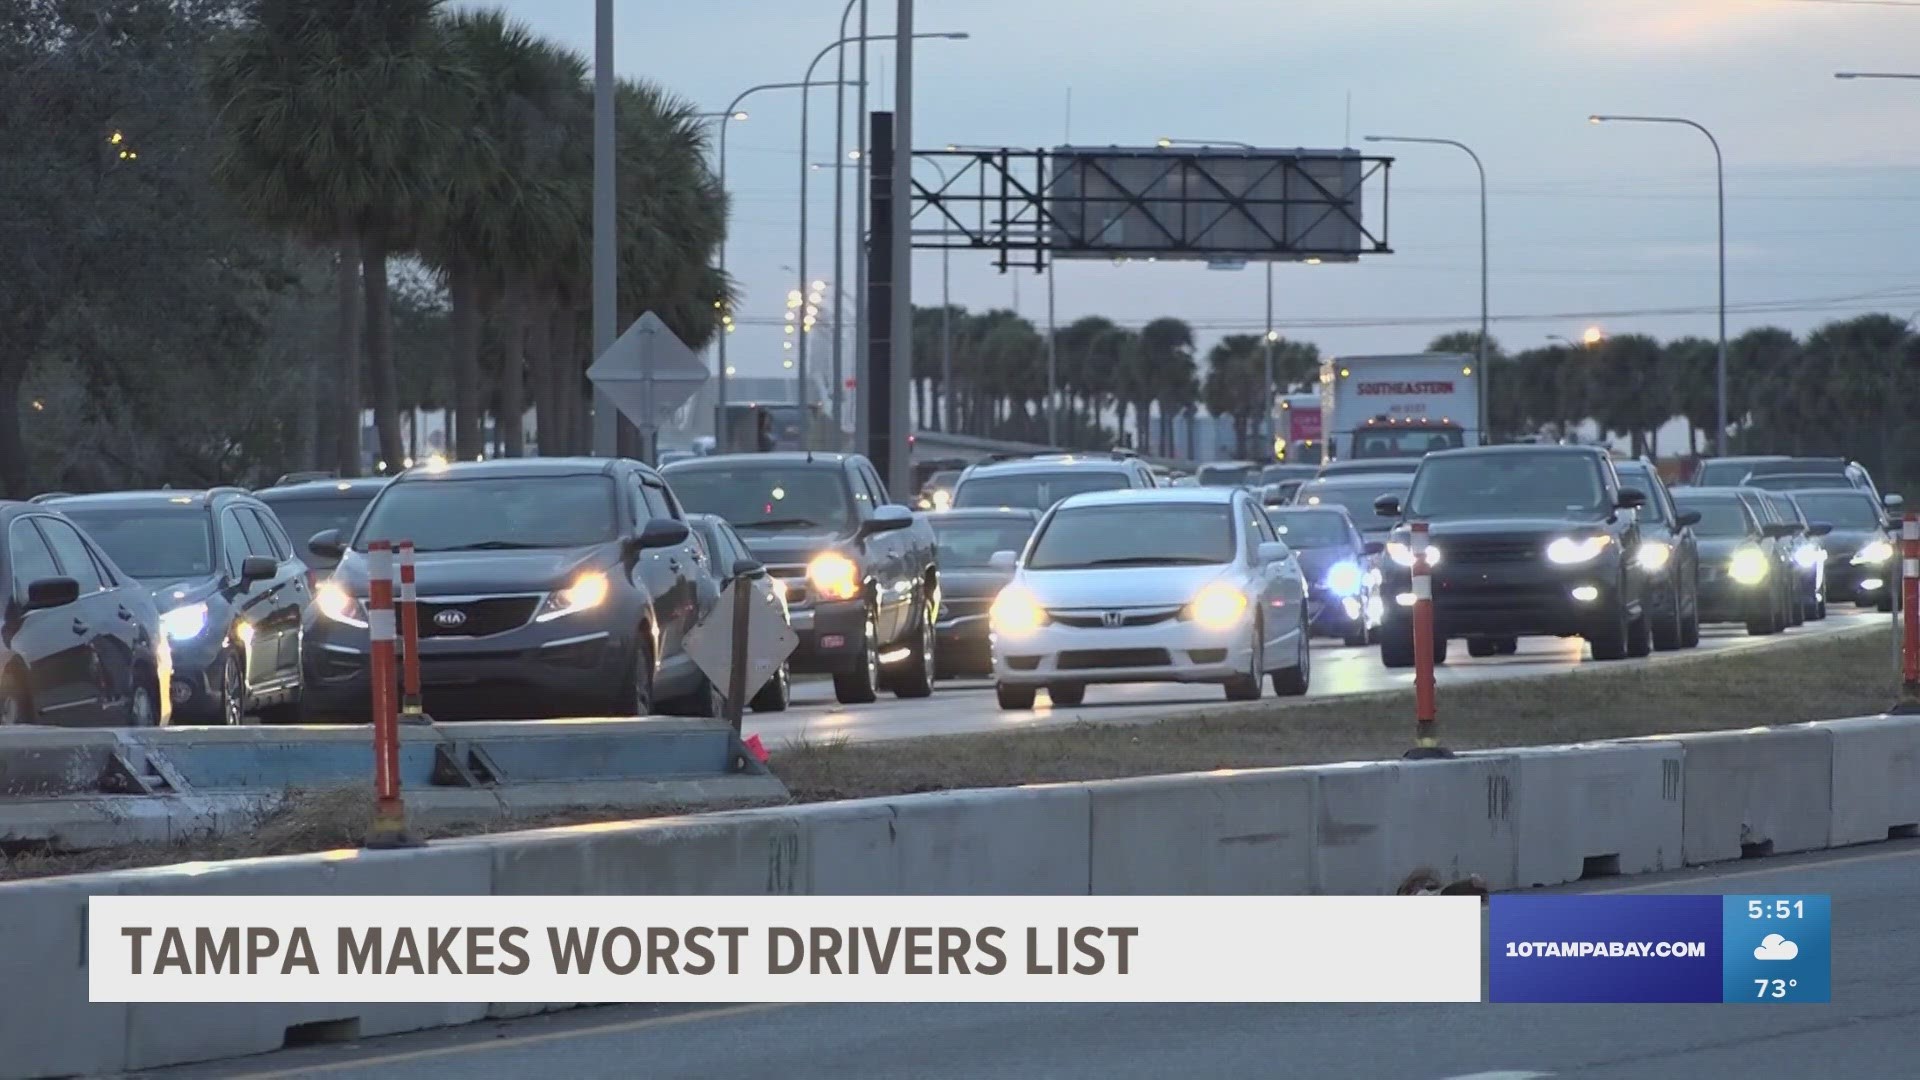 Florida has some of the most dangerous roads in the country, but what about its drivers? One Tampa Bay area city cracked the Top Ten list for the worst drivers.